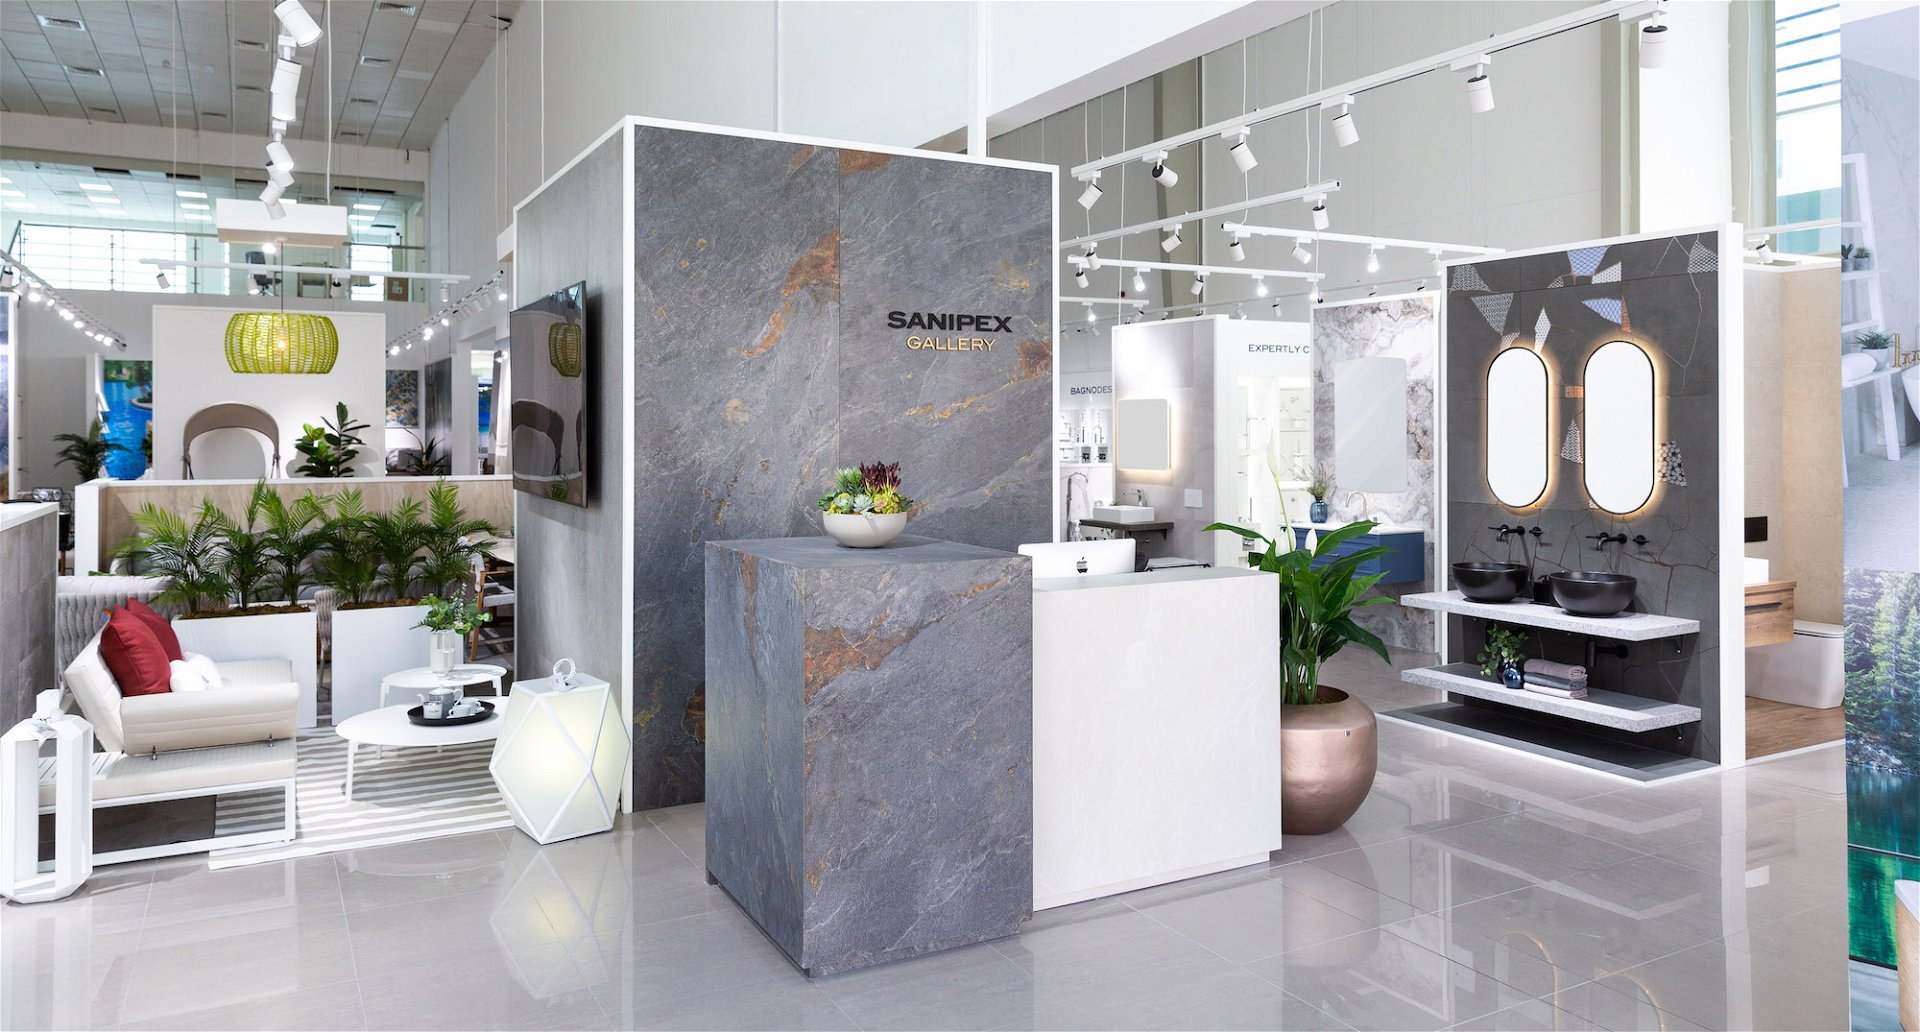 Inspirational Living Comes to Sharjah: SANIPEXGROUP Opens Its Fifth Lifestyle Concept Store in the UAE